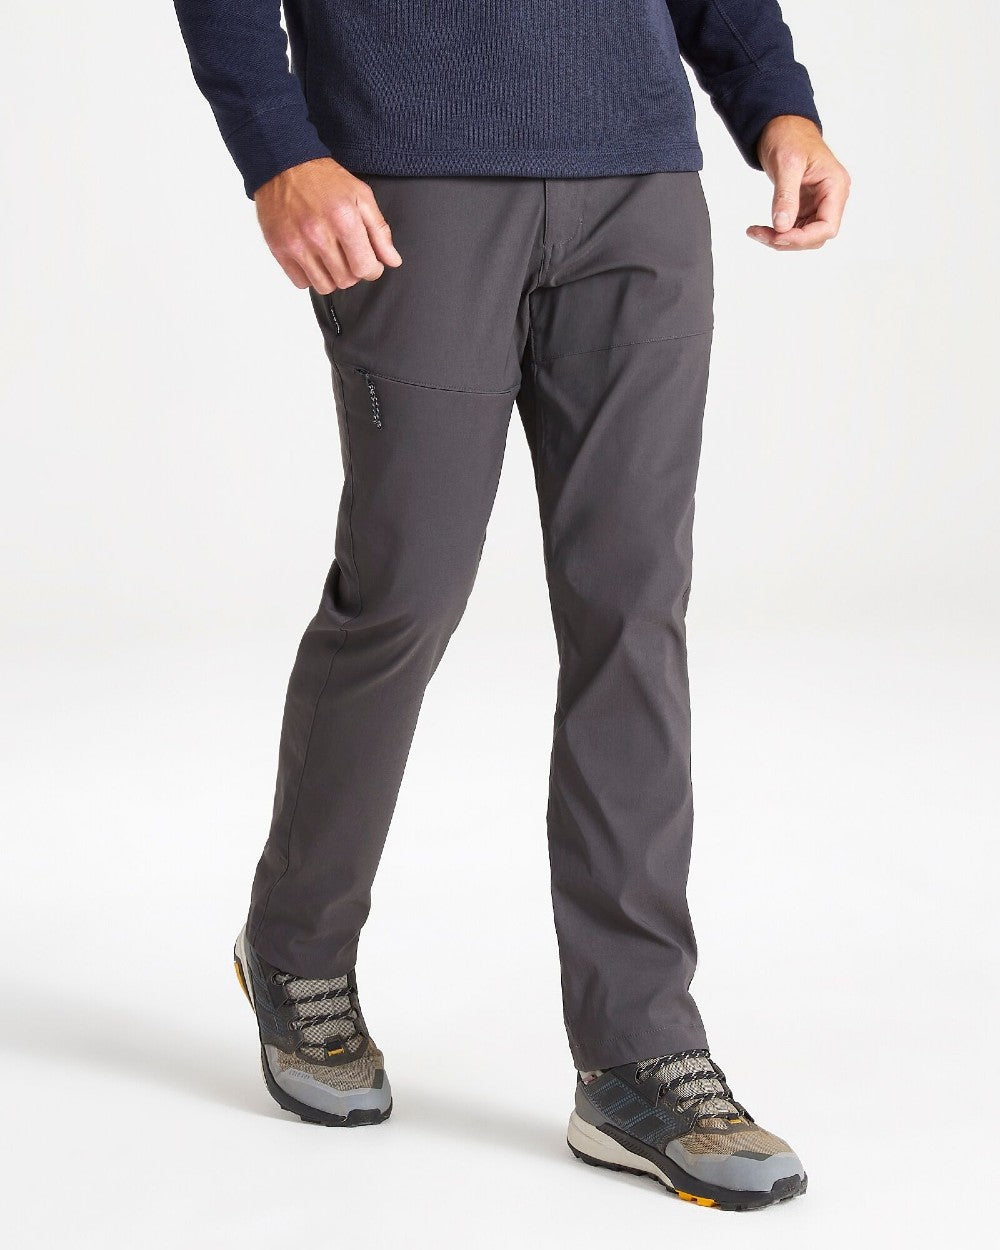 Dark Lead Coloured Craghoppers Mens Kiwi Pro II Trousers On A Grey Background 